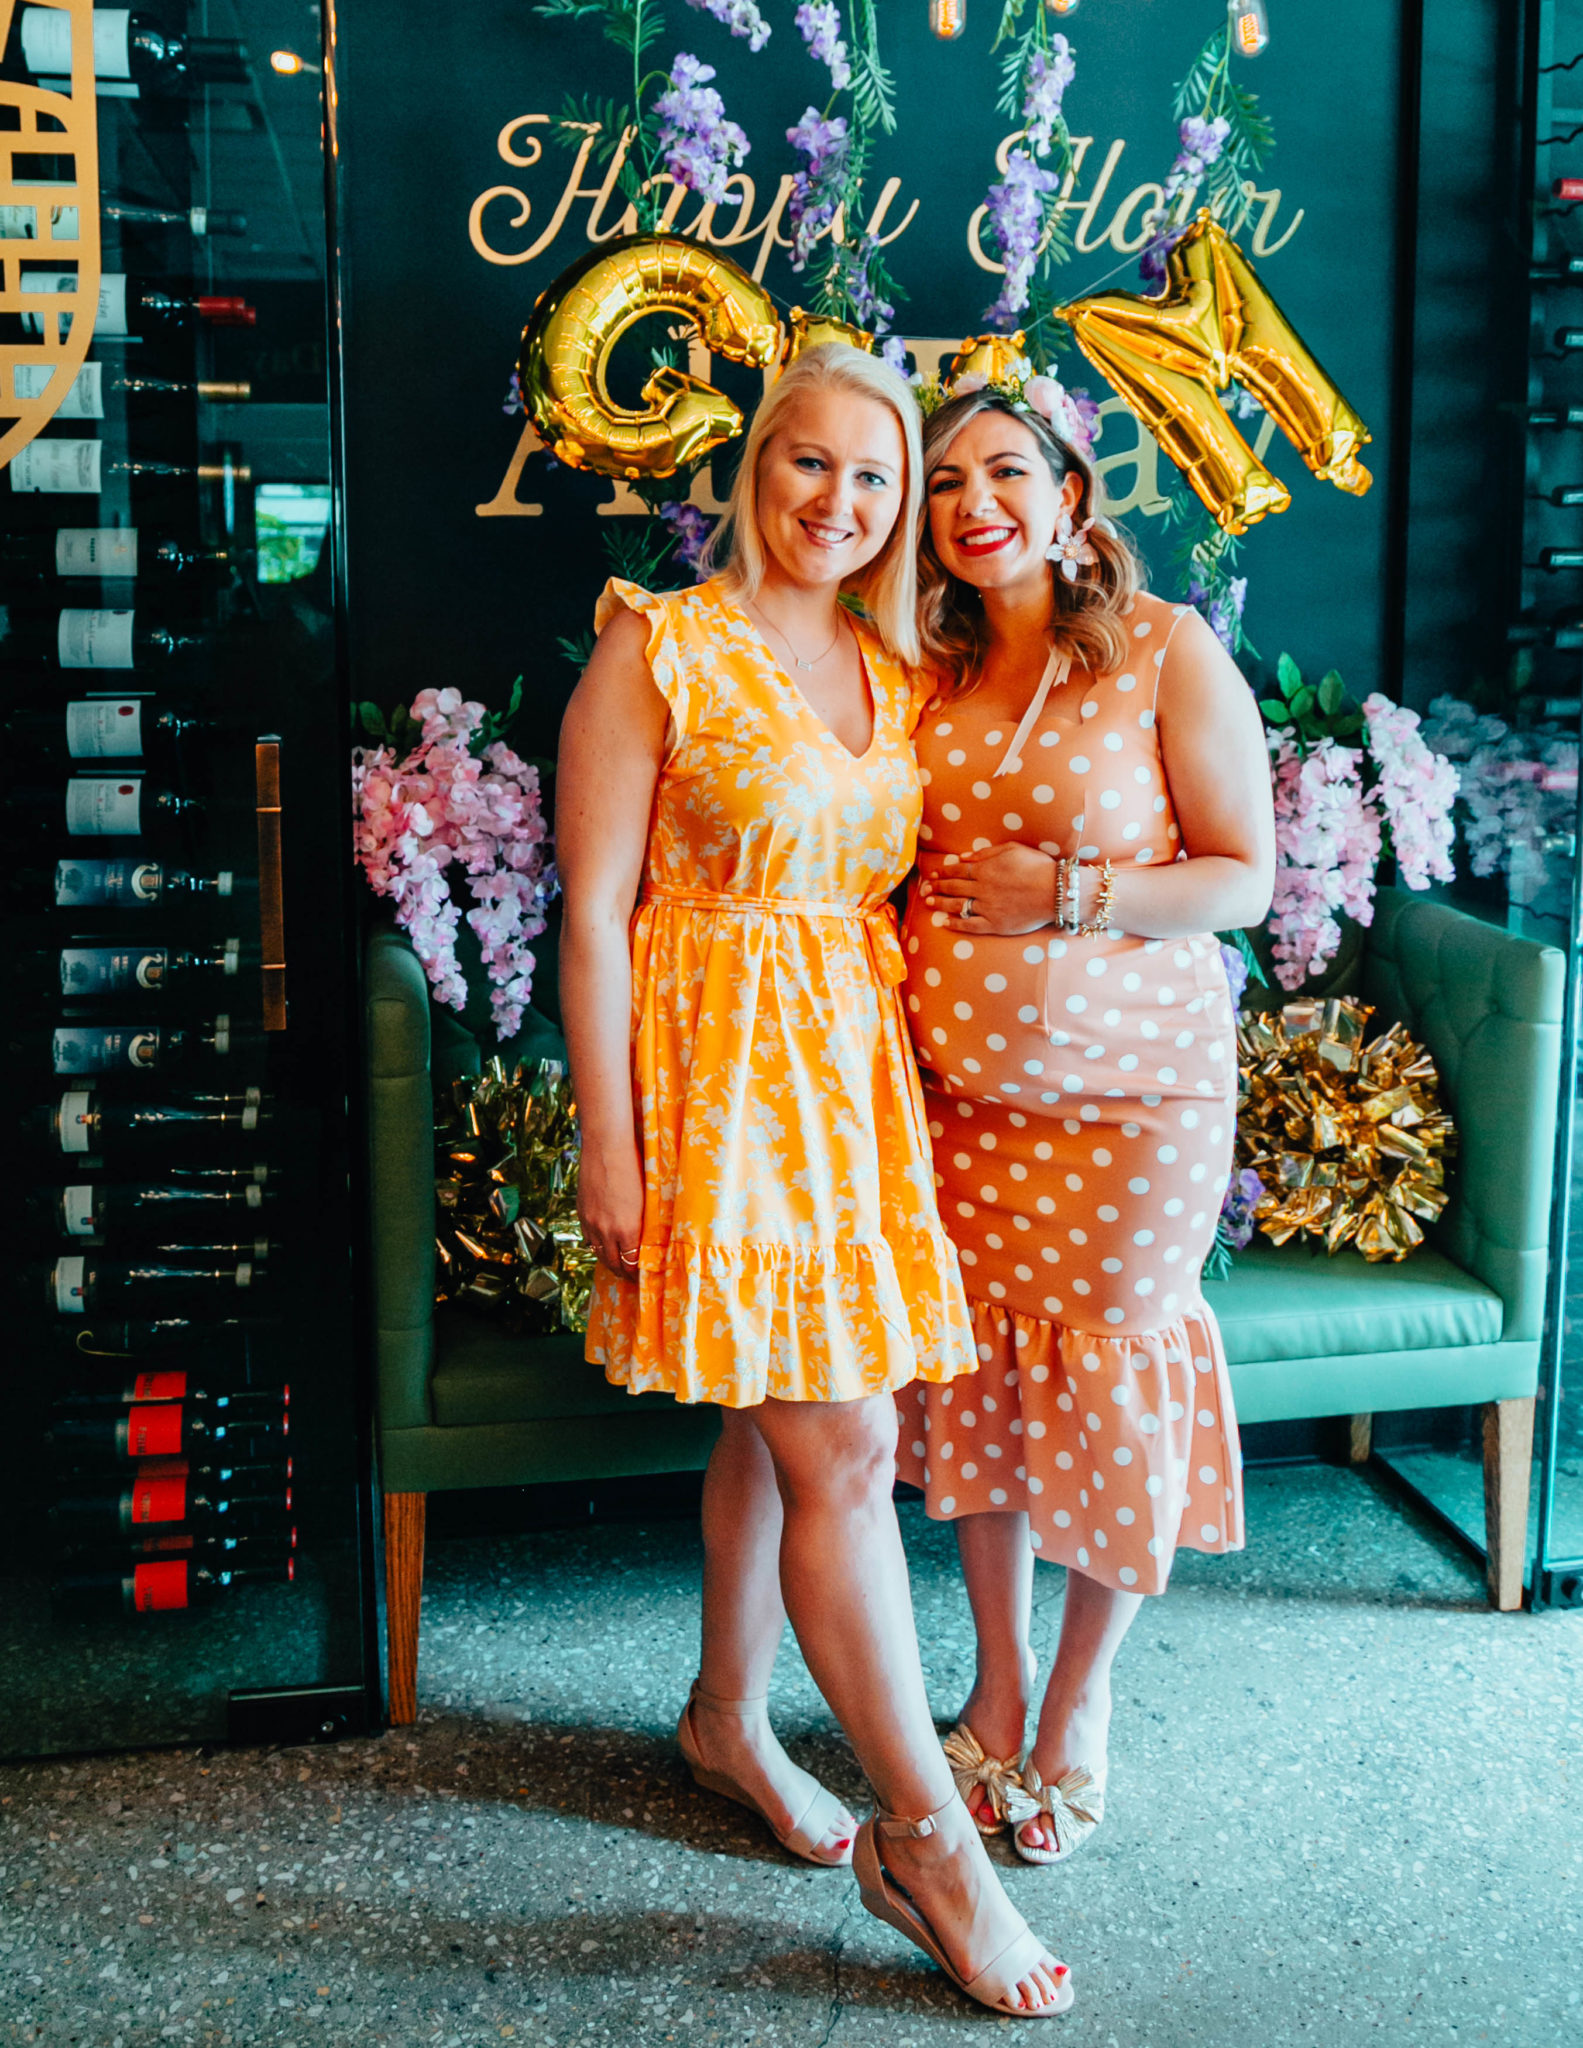 Baby Shower outfit featured by top US fashion blog, Glass of Glam: image of a pregnant woman attending her baby shower wearing an ASOS polka dot maternity dress, Loeffler Randall sandals, and Big Flower statement earrings.